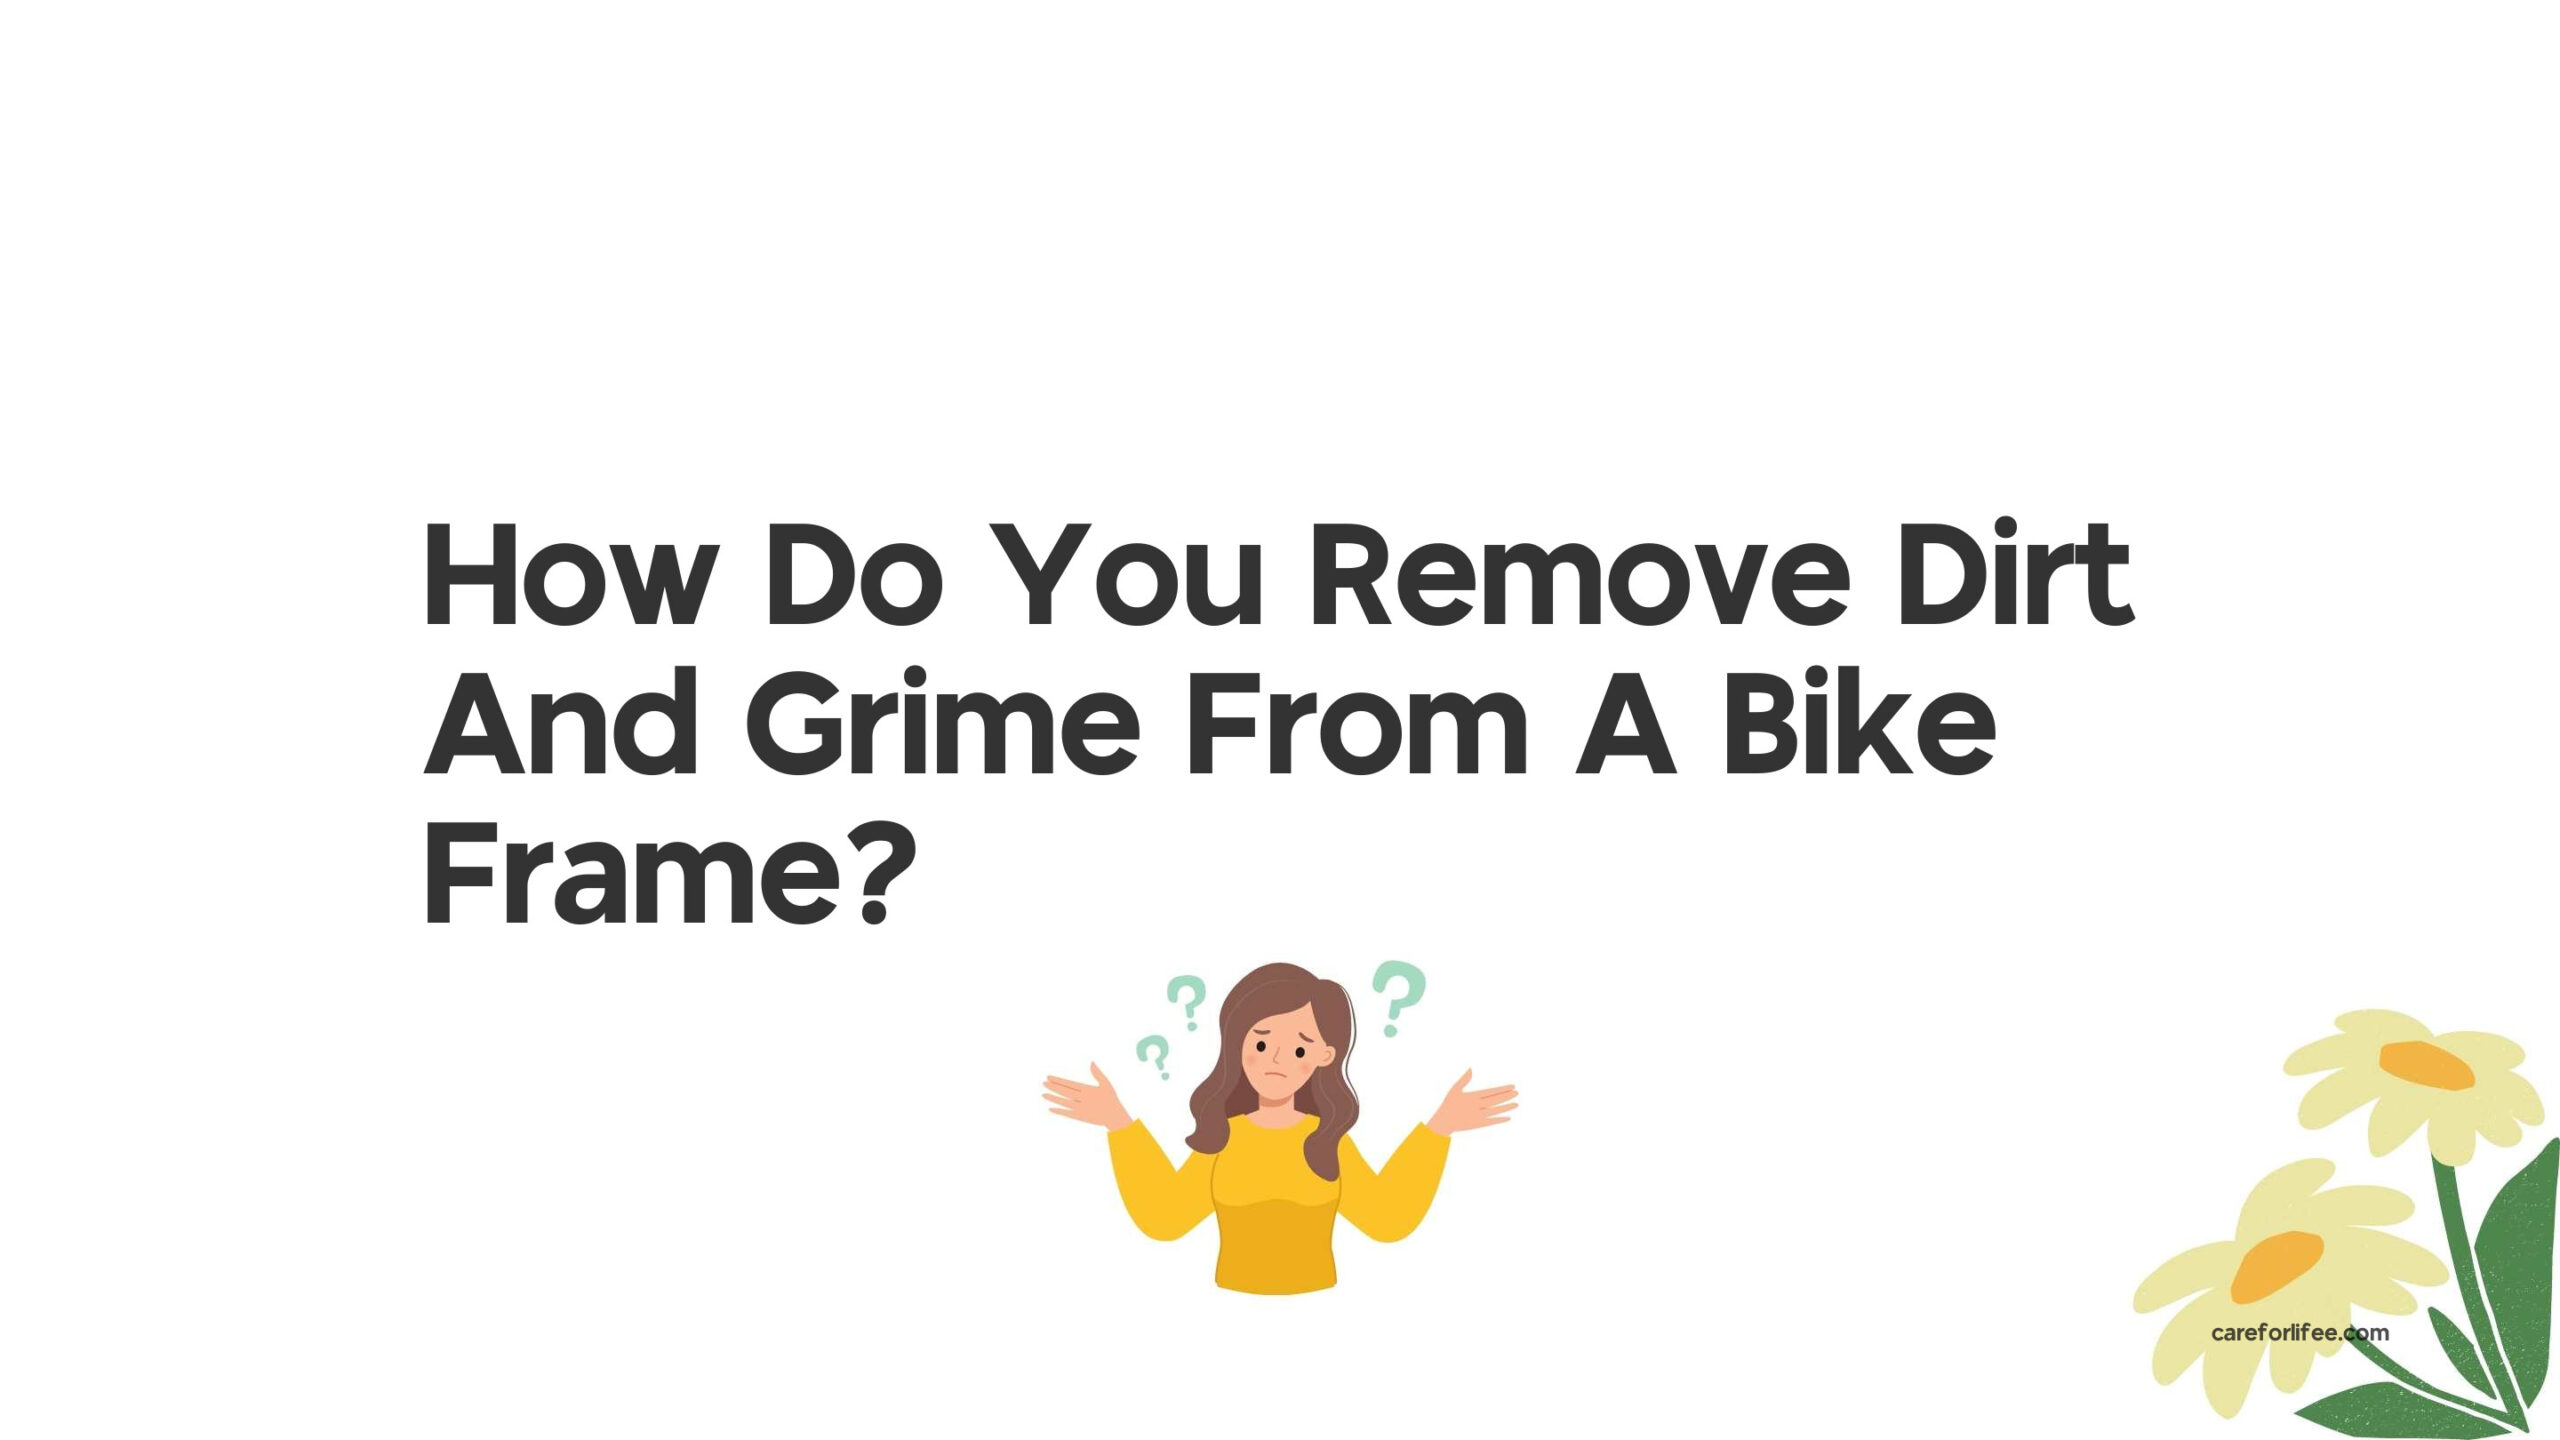 How Do You Remove Dirt And Grime From A Bike Frame?